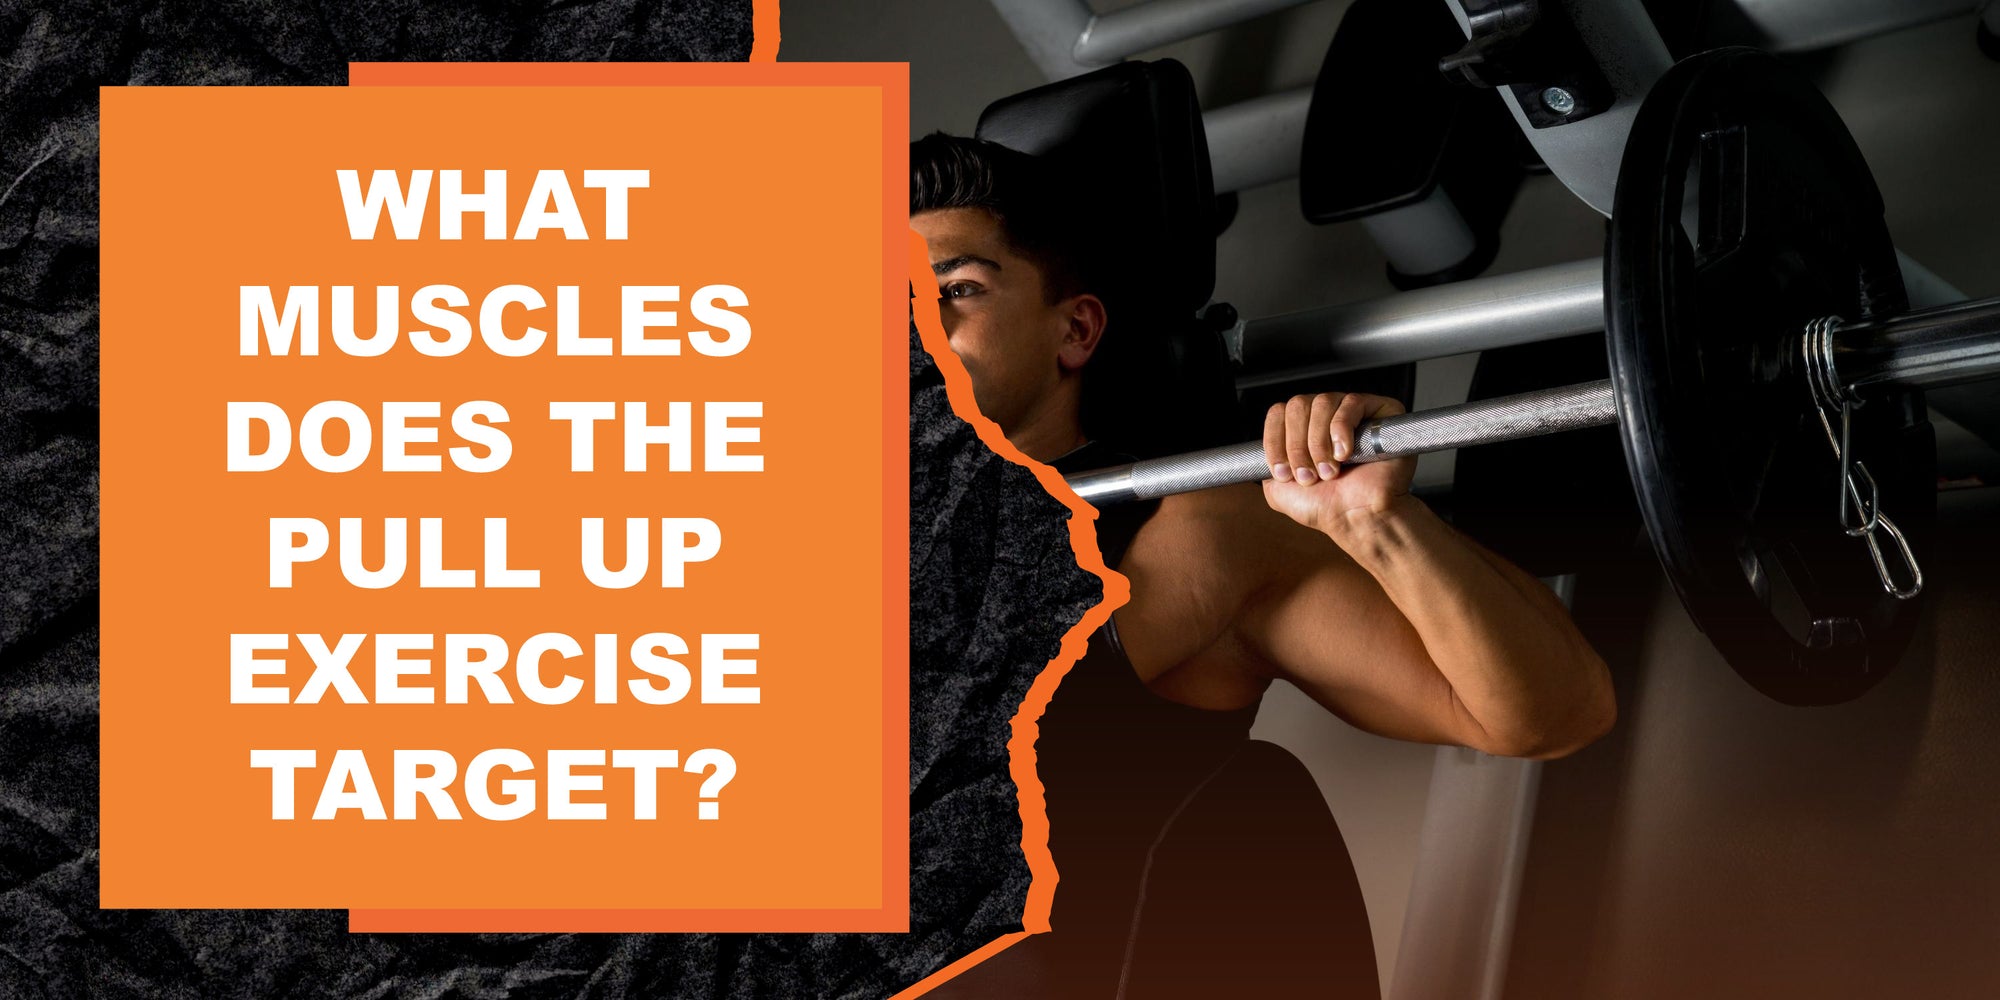 What Muscles Does the Pull Up Exercise Target?